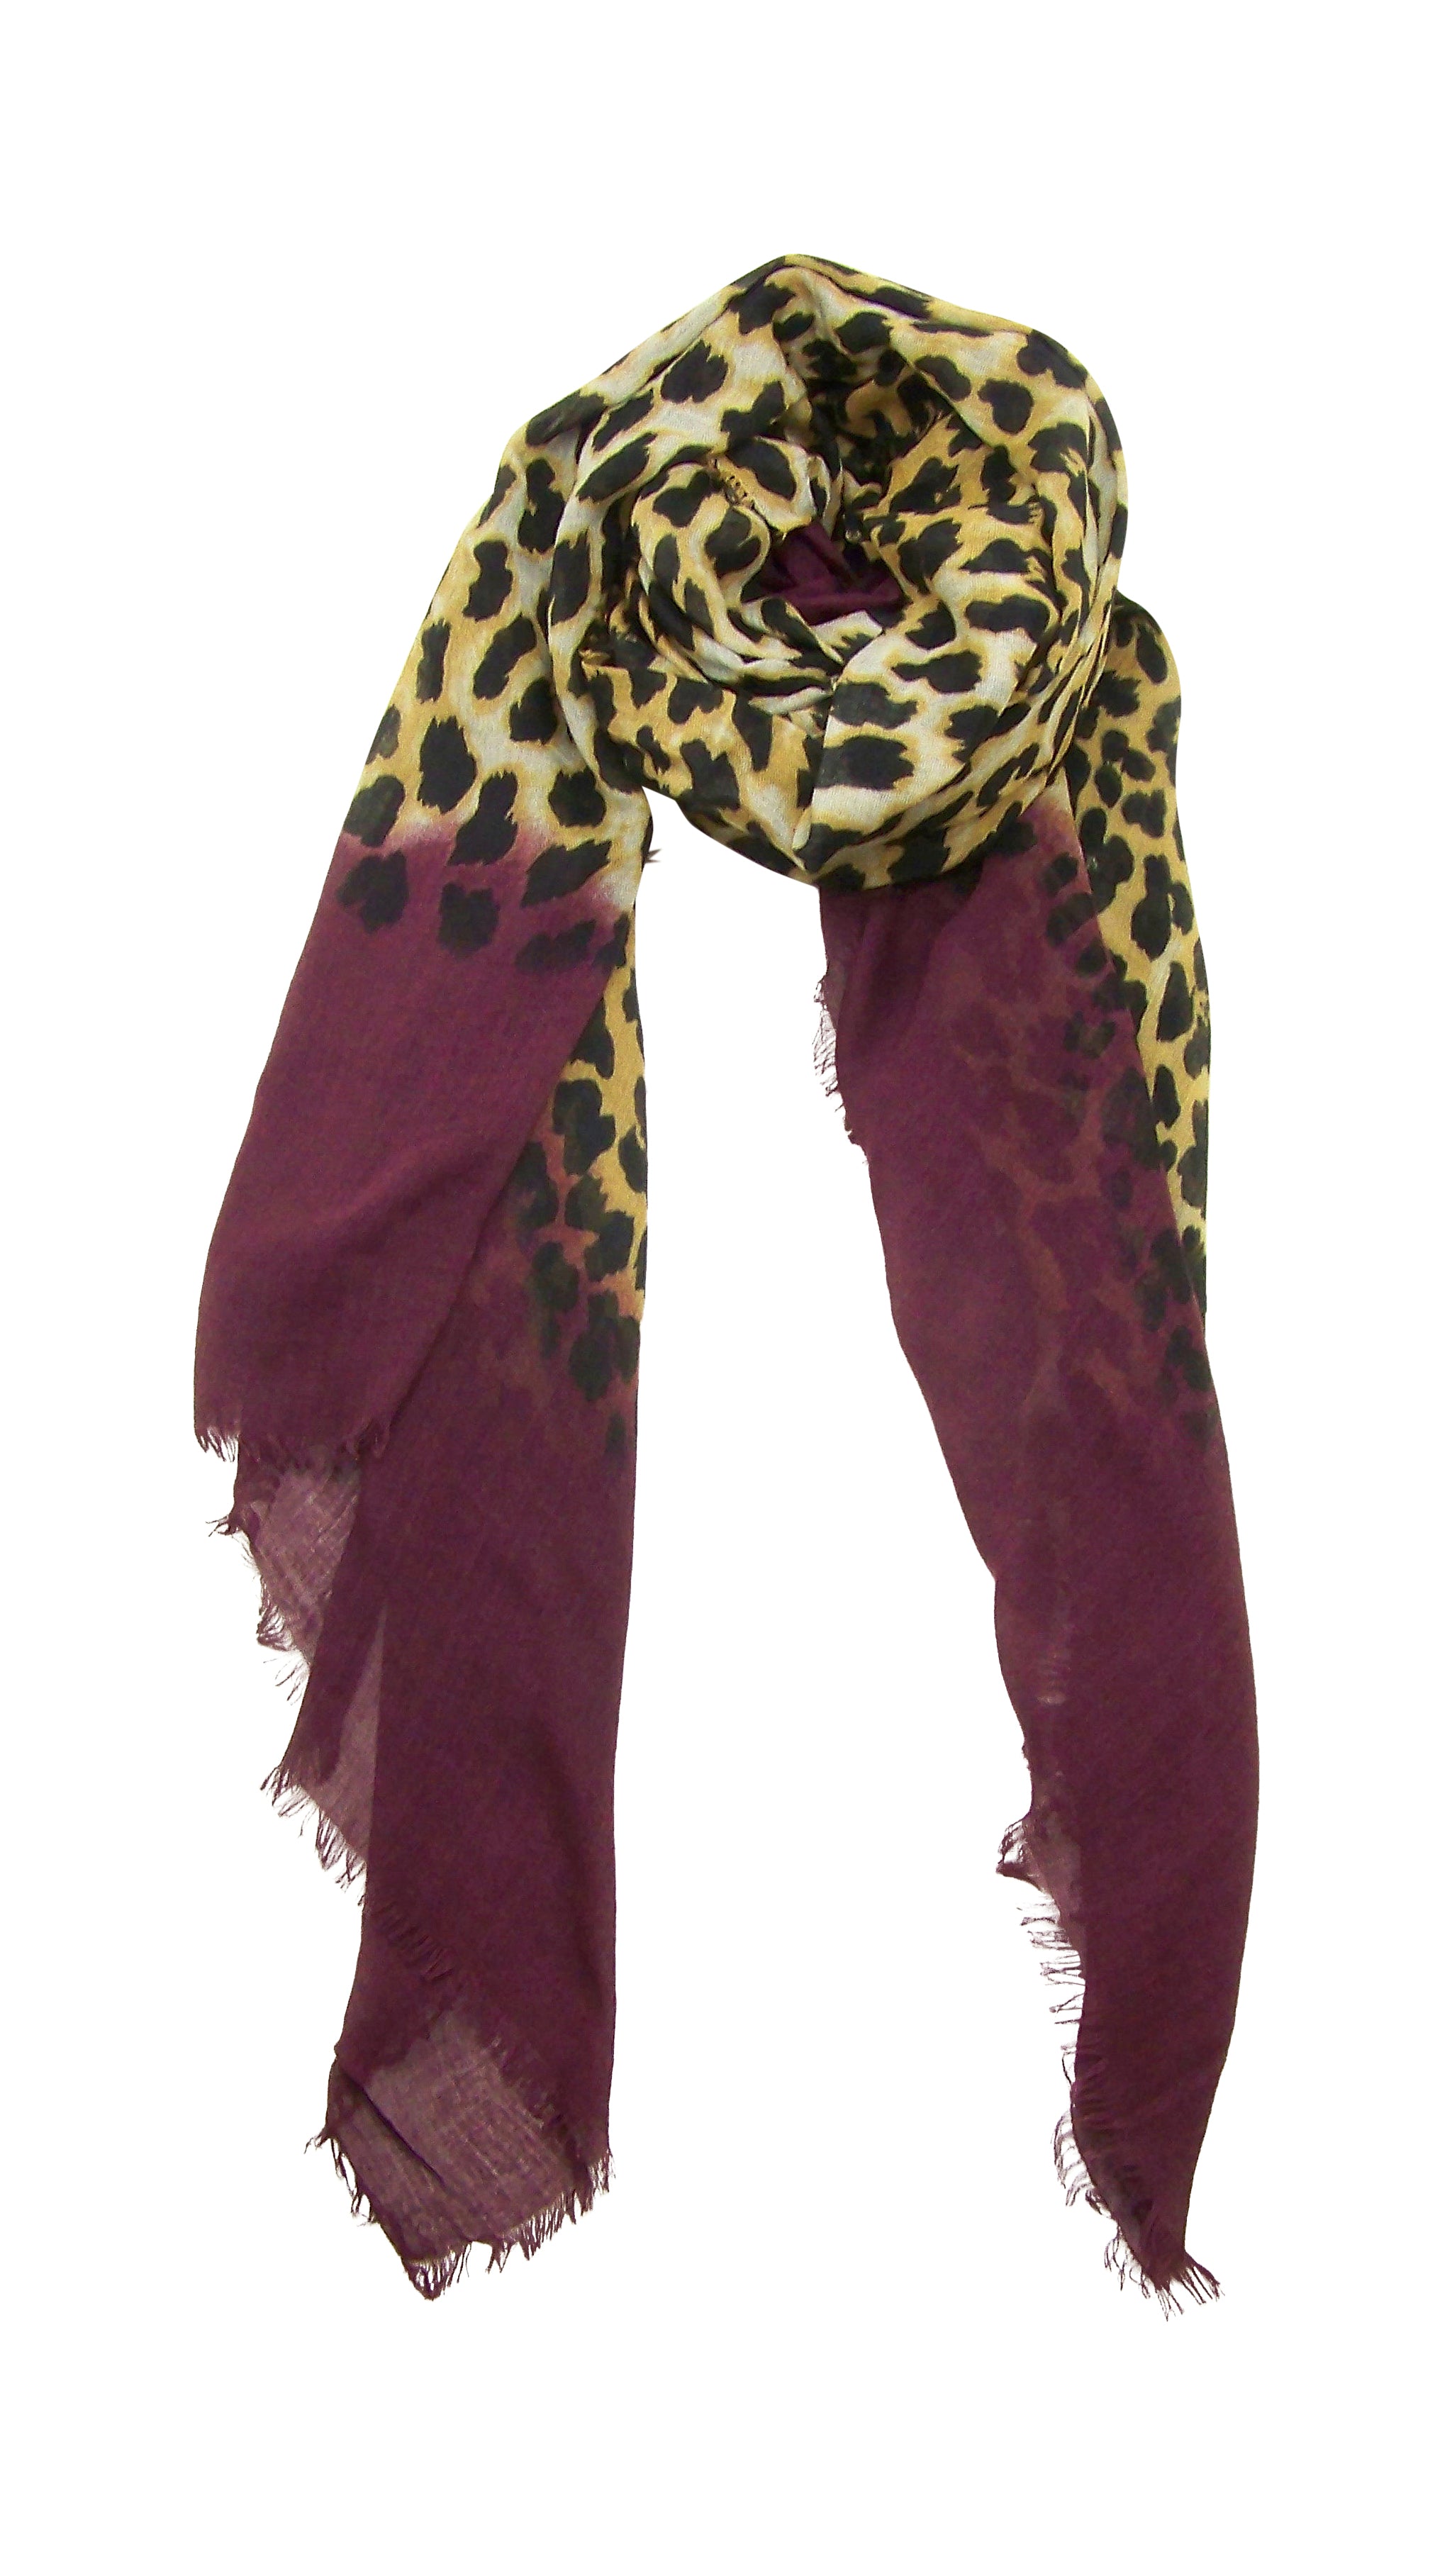 Primary Rolled View Blue Pacific Animal Print Cashmere and Silk Scarf in Burgundy Brown Purple Fig and Tan